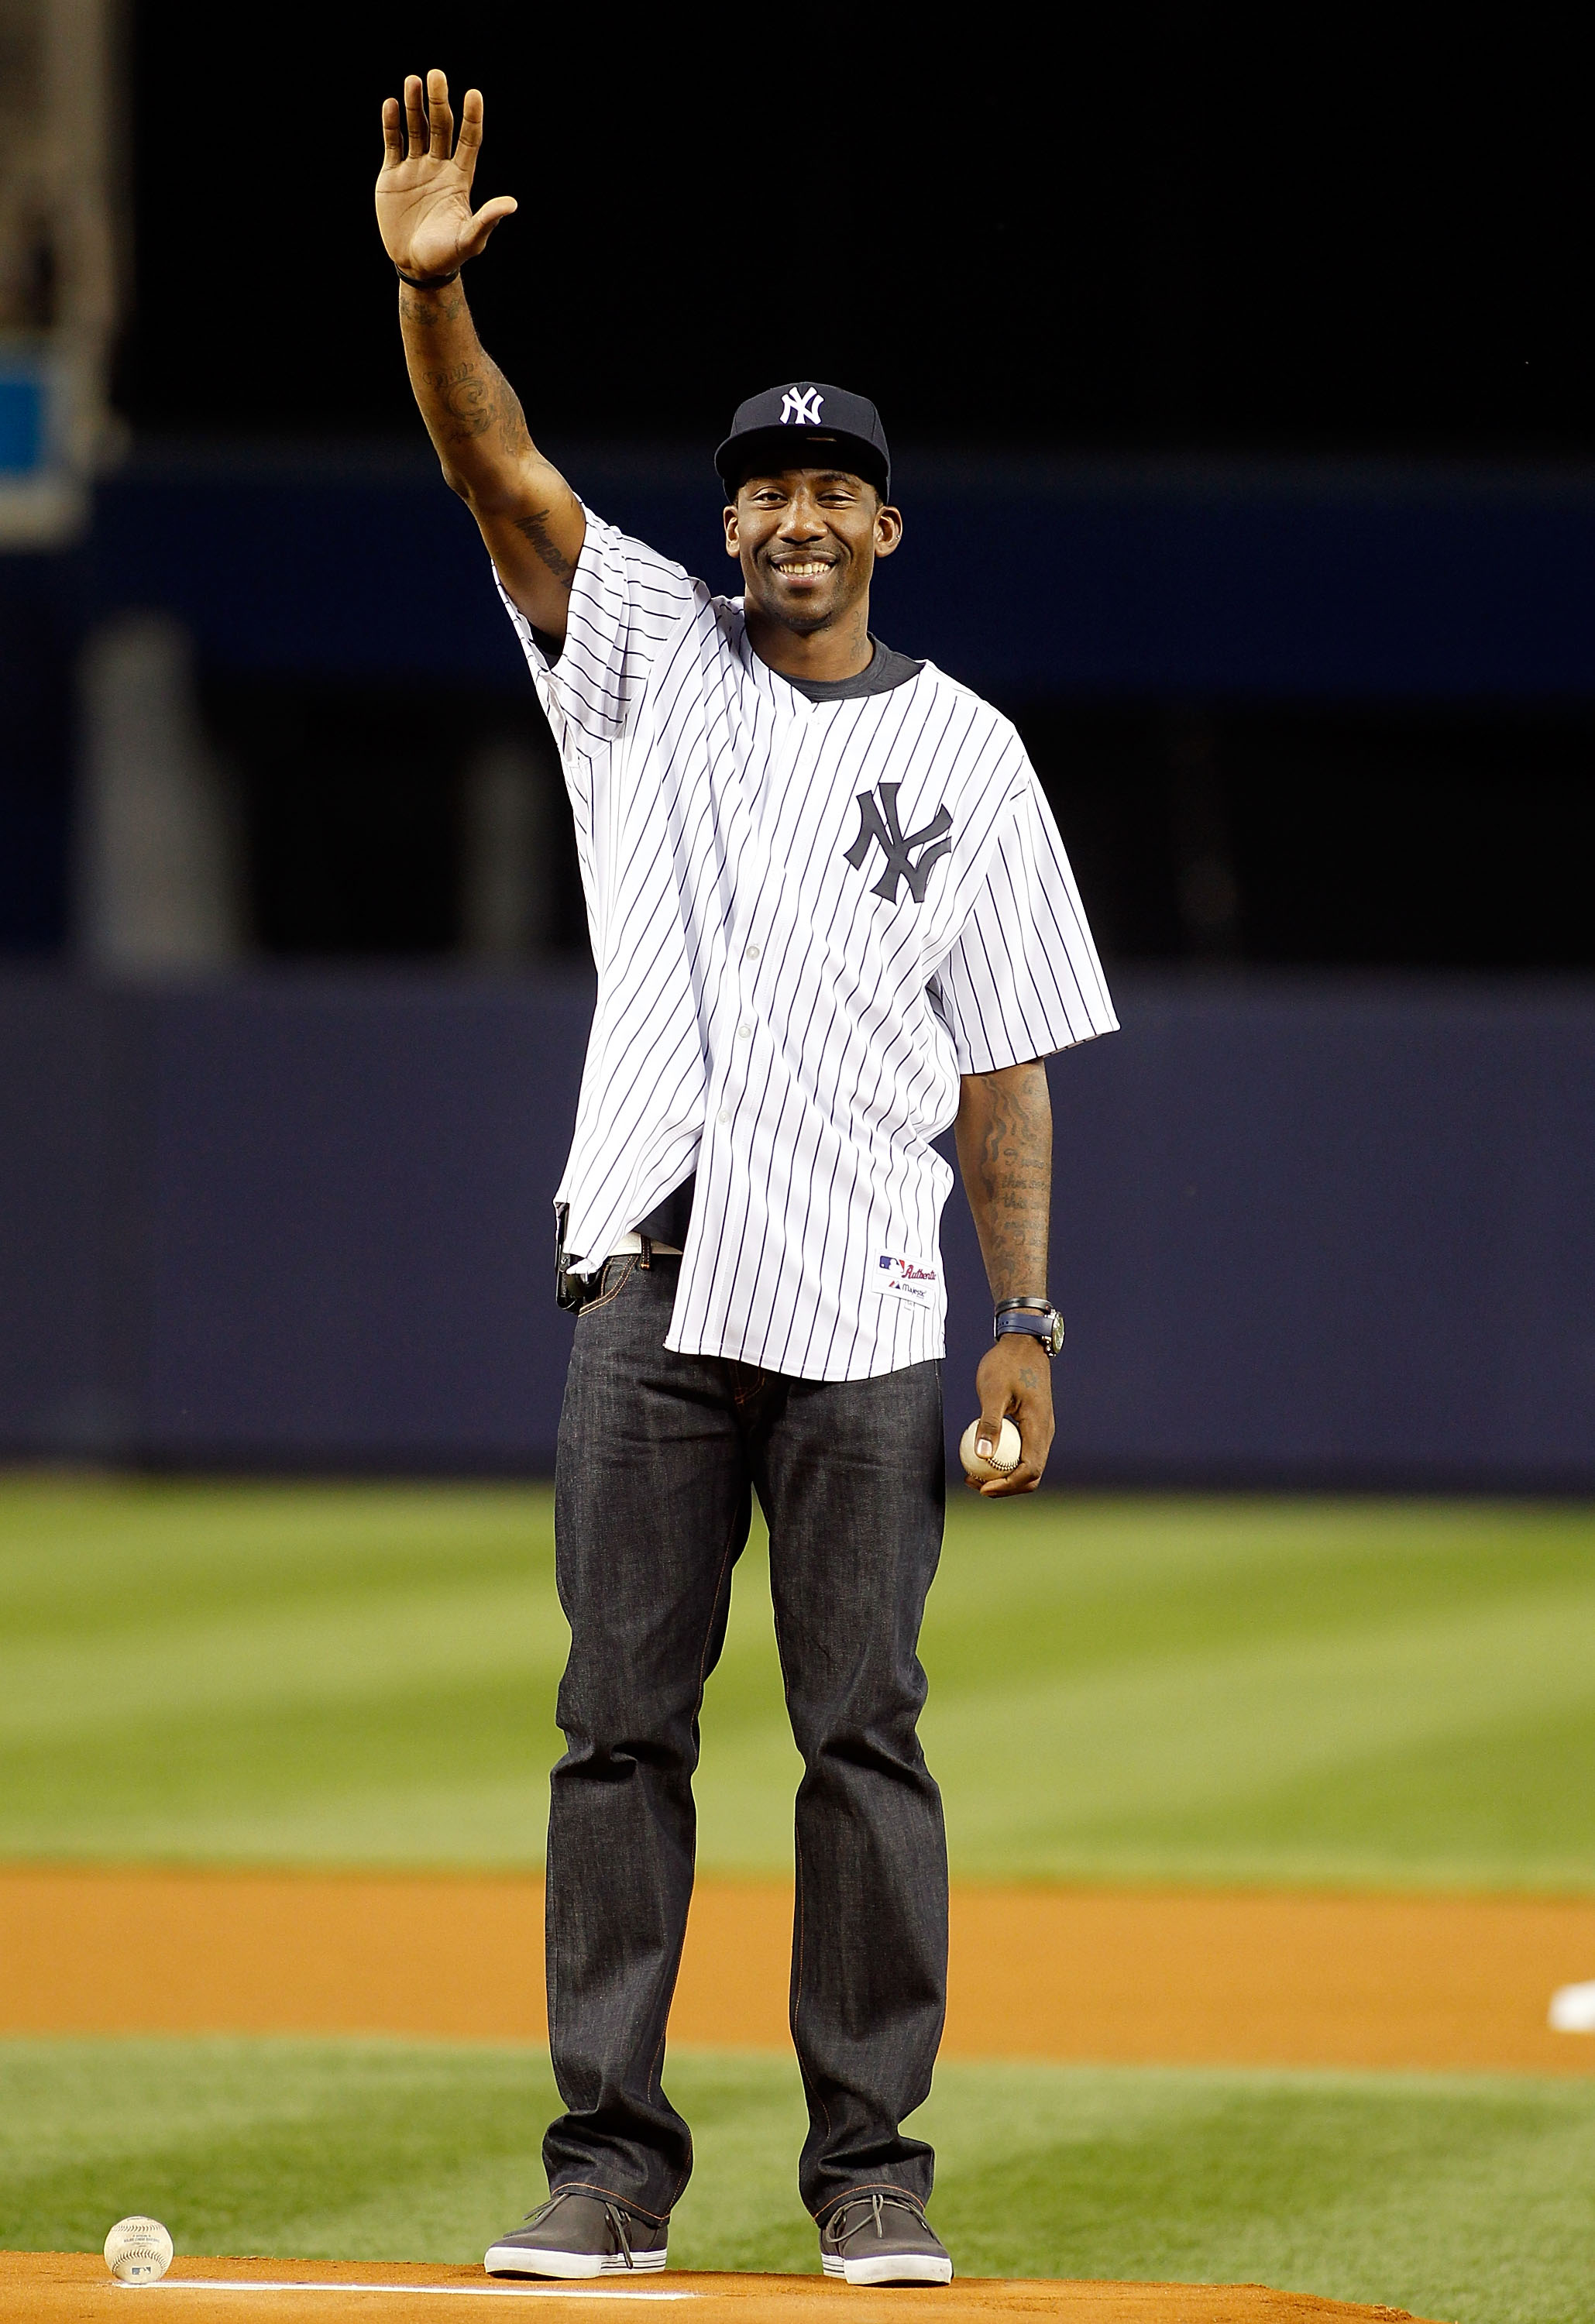 NEW YORK - SEPTEMBER 23:  Amar'e Stoudemire of the New York Knicks throws out the first pitch prior to the game between the New York Yankees and the Tampa Bay Rays on September 23, 2010 at Yankee Stadium in the Bronx borough of New York City.  (Photo by M